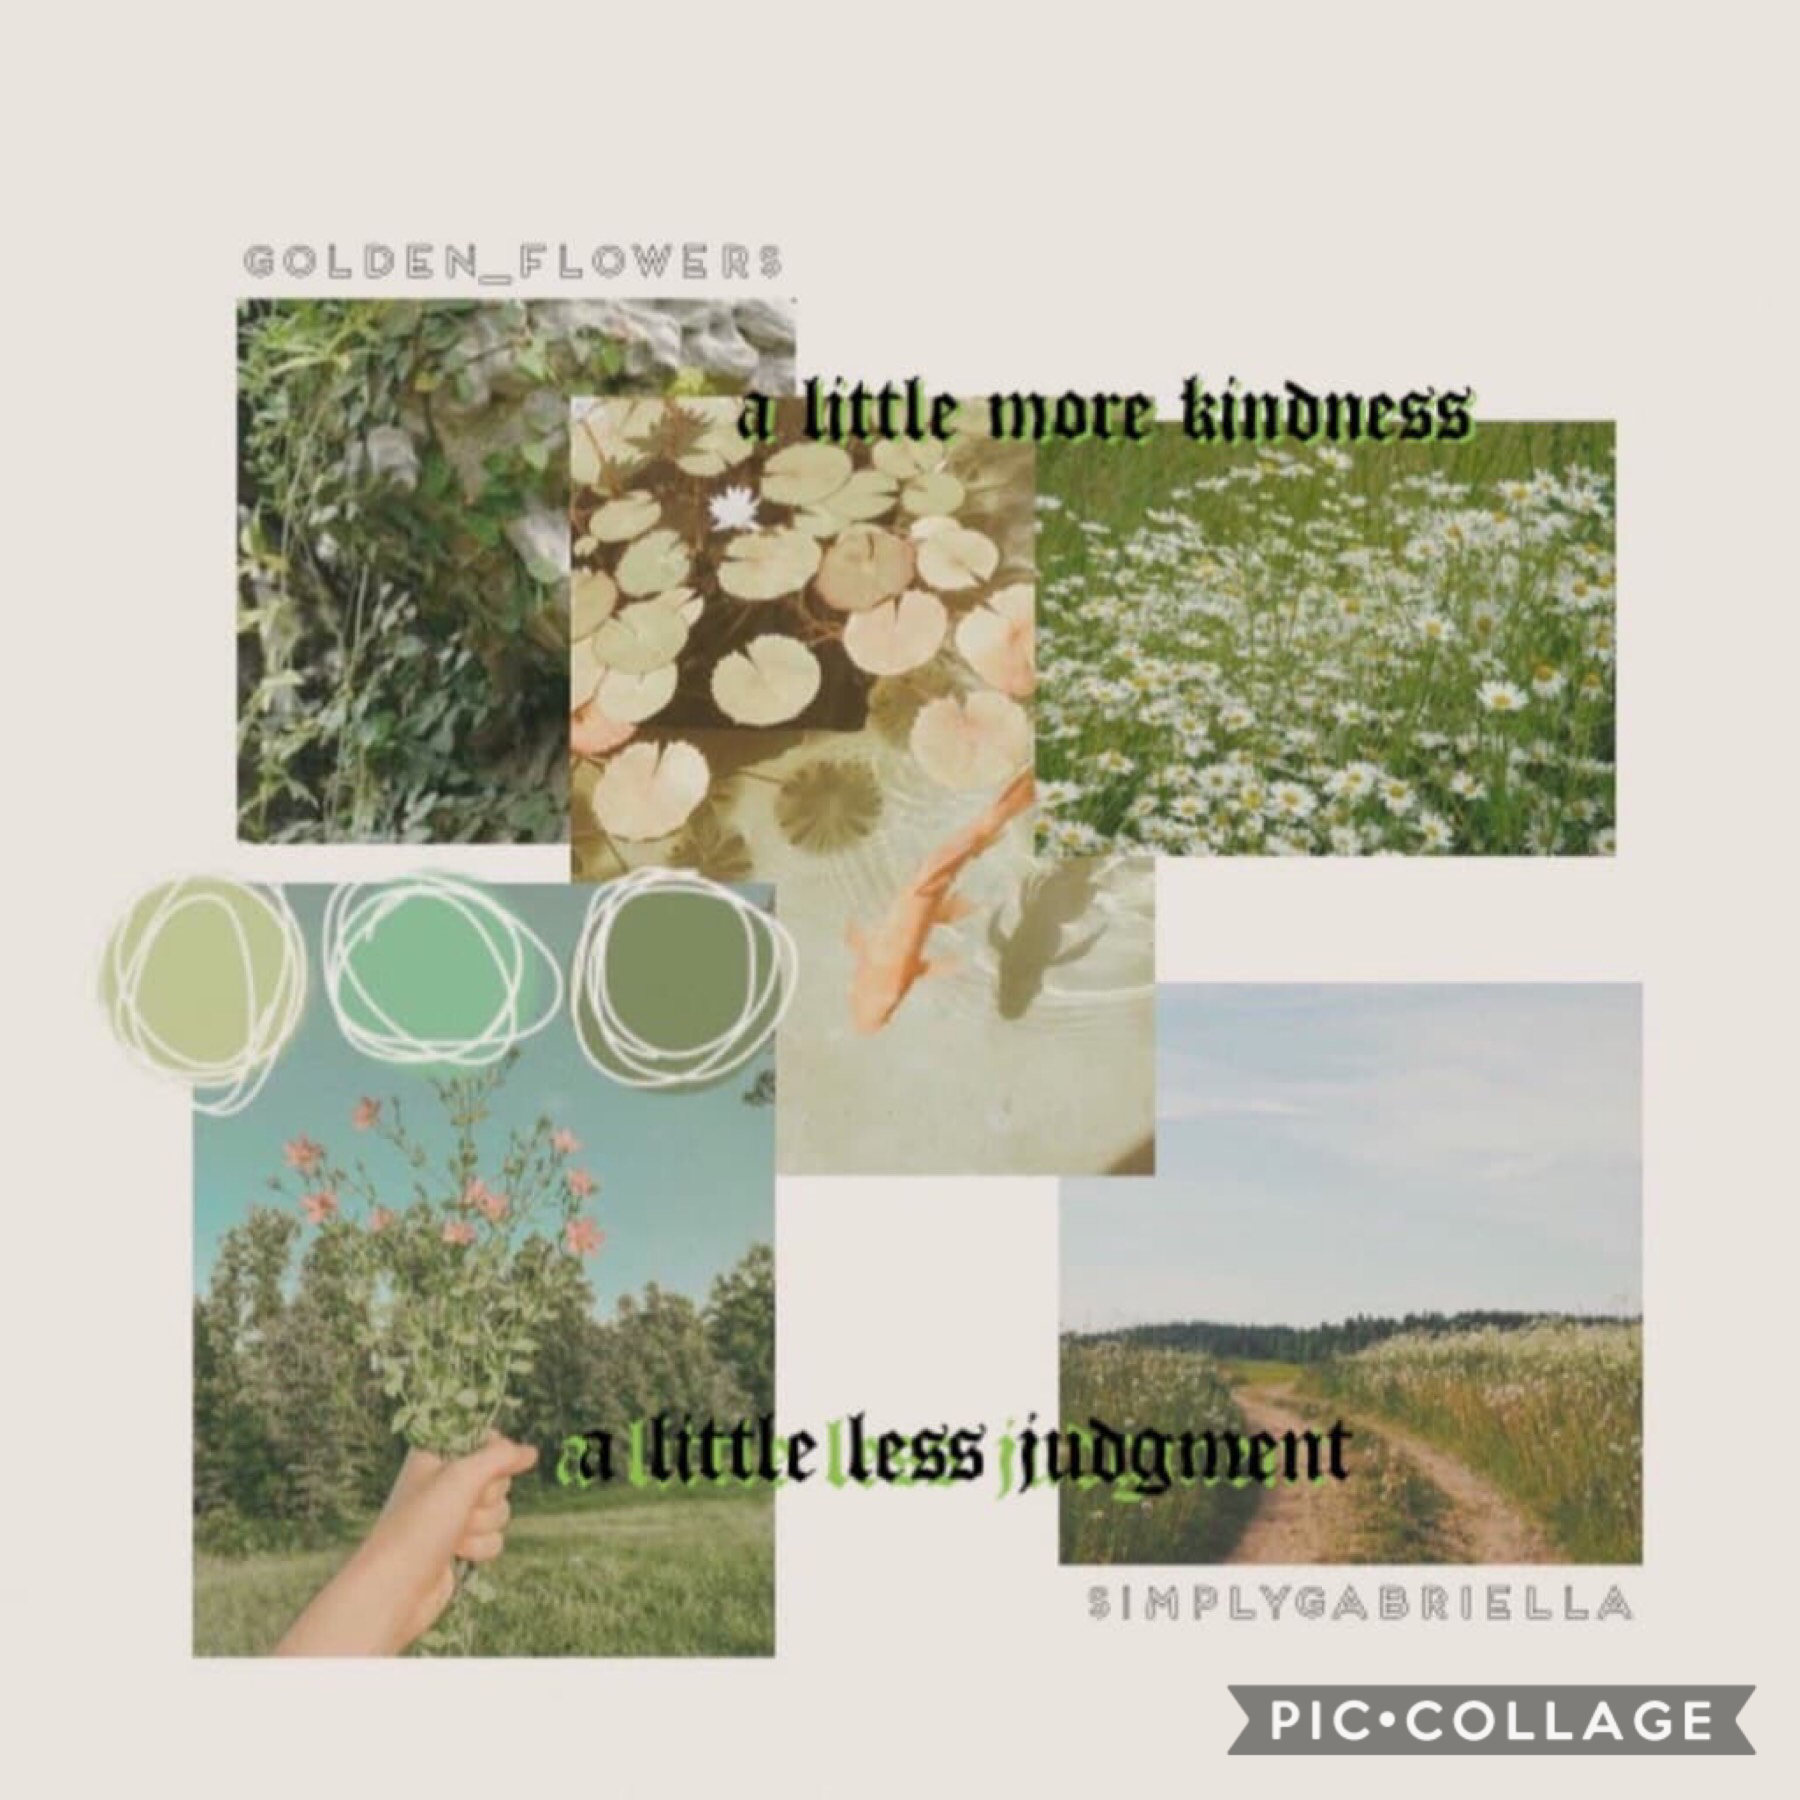 Collab with🥁🥁🥁🥁🥁
SimplyGabriella! She is sooo talented, you should go check out her page🌿💛

I was thinking that whenever I edit the bg of a collage, I could post what I did to edit it in remixes(I use vsco btw)